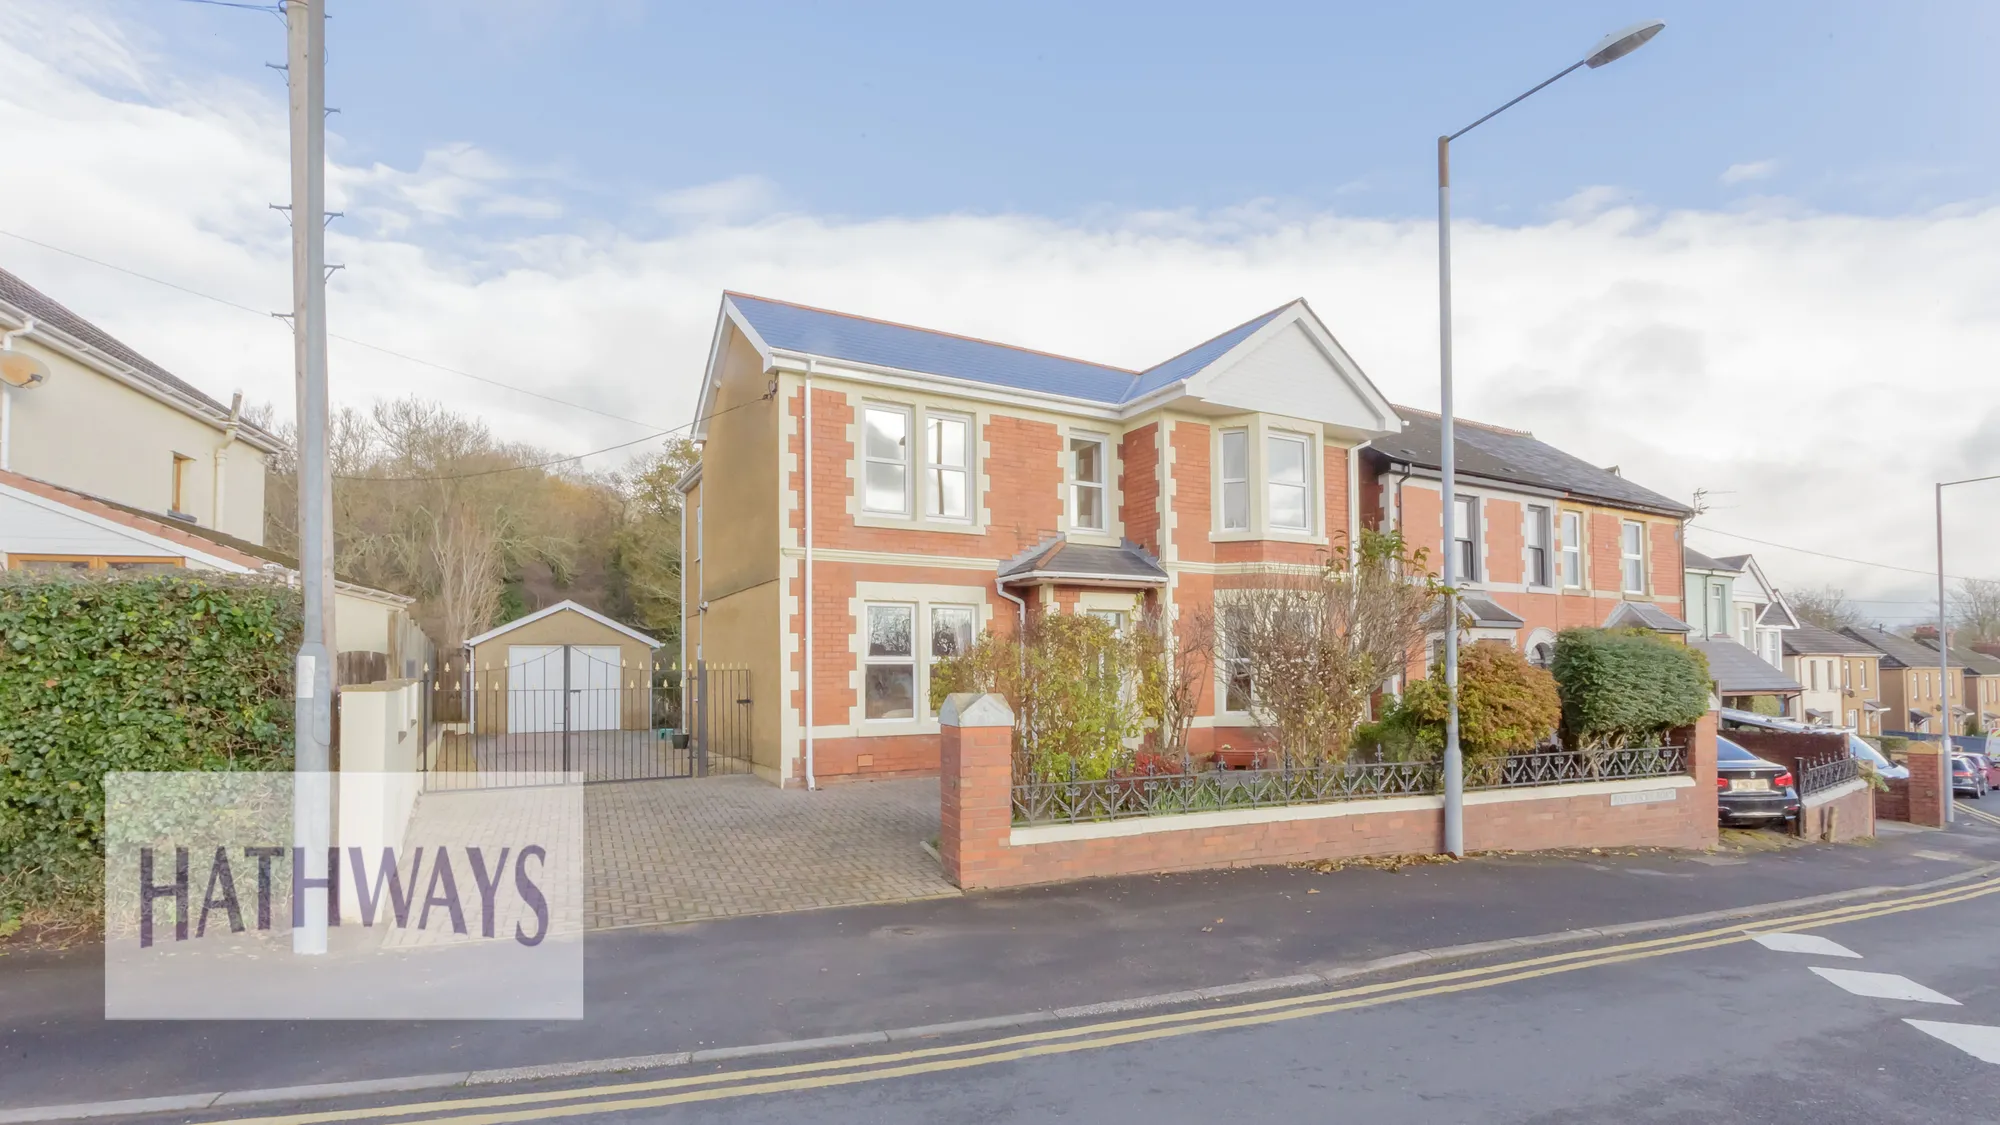 4 bed detached house for sale in Five Locks Road, Cwmbran - Property Image 1